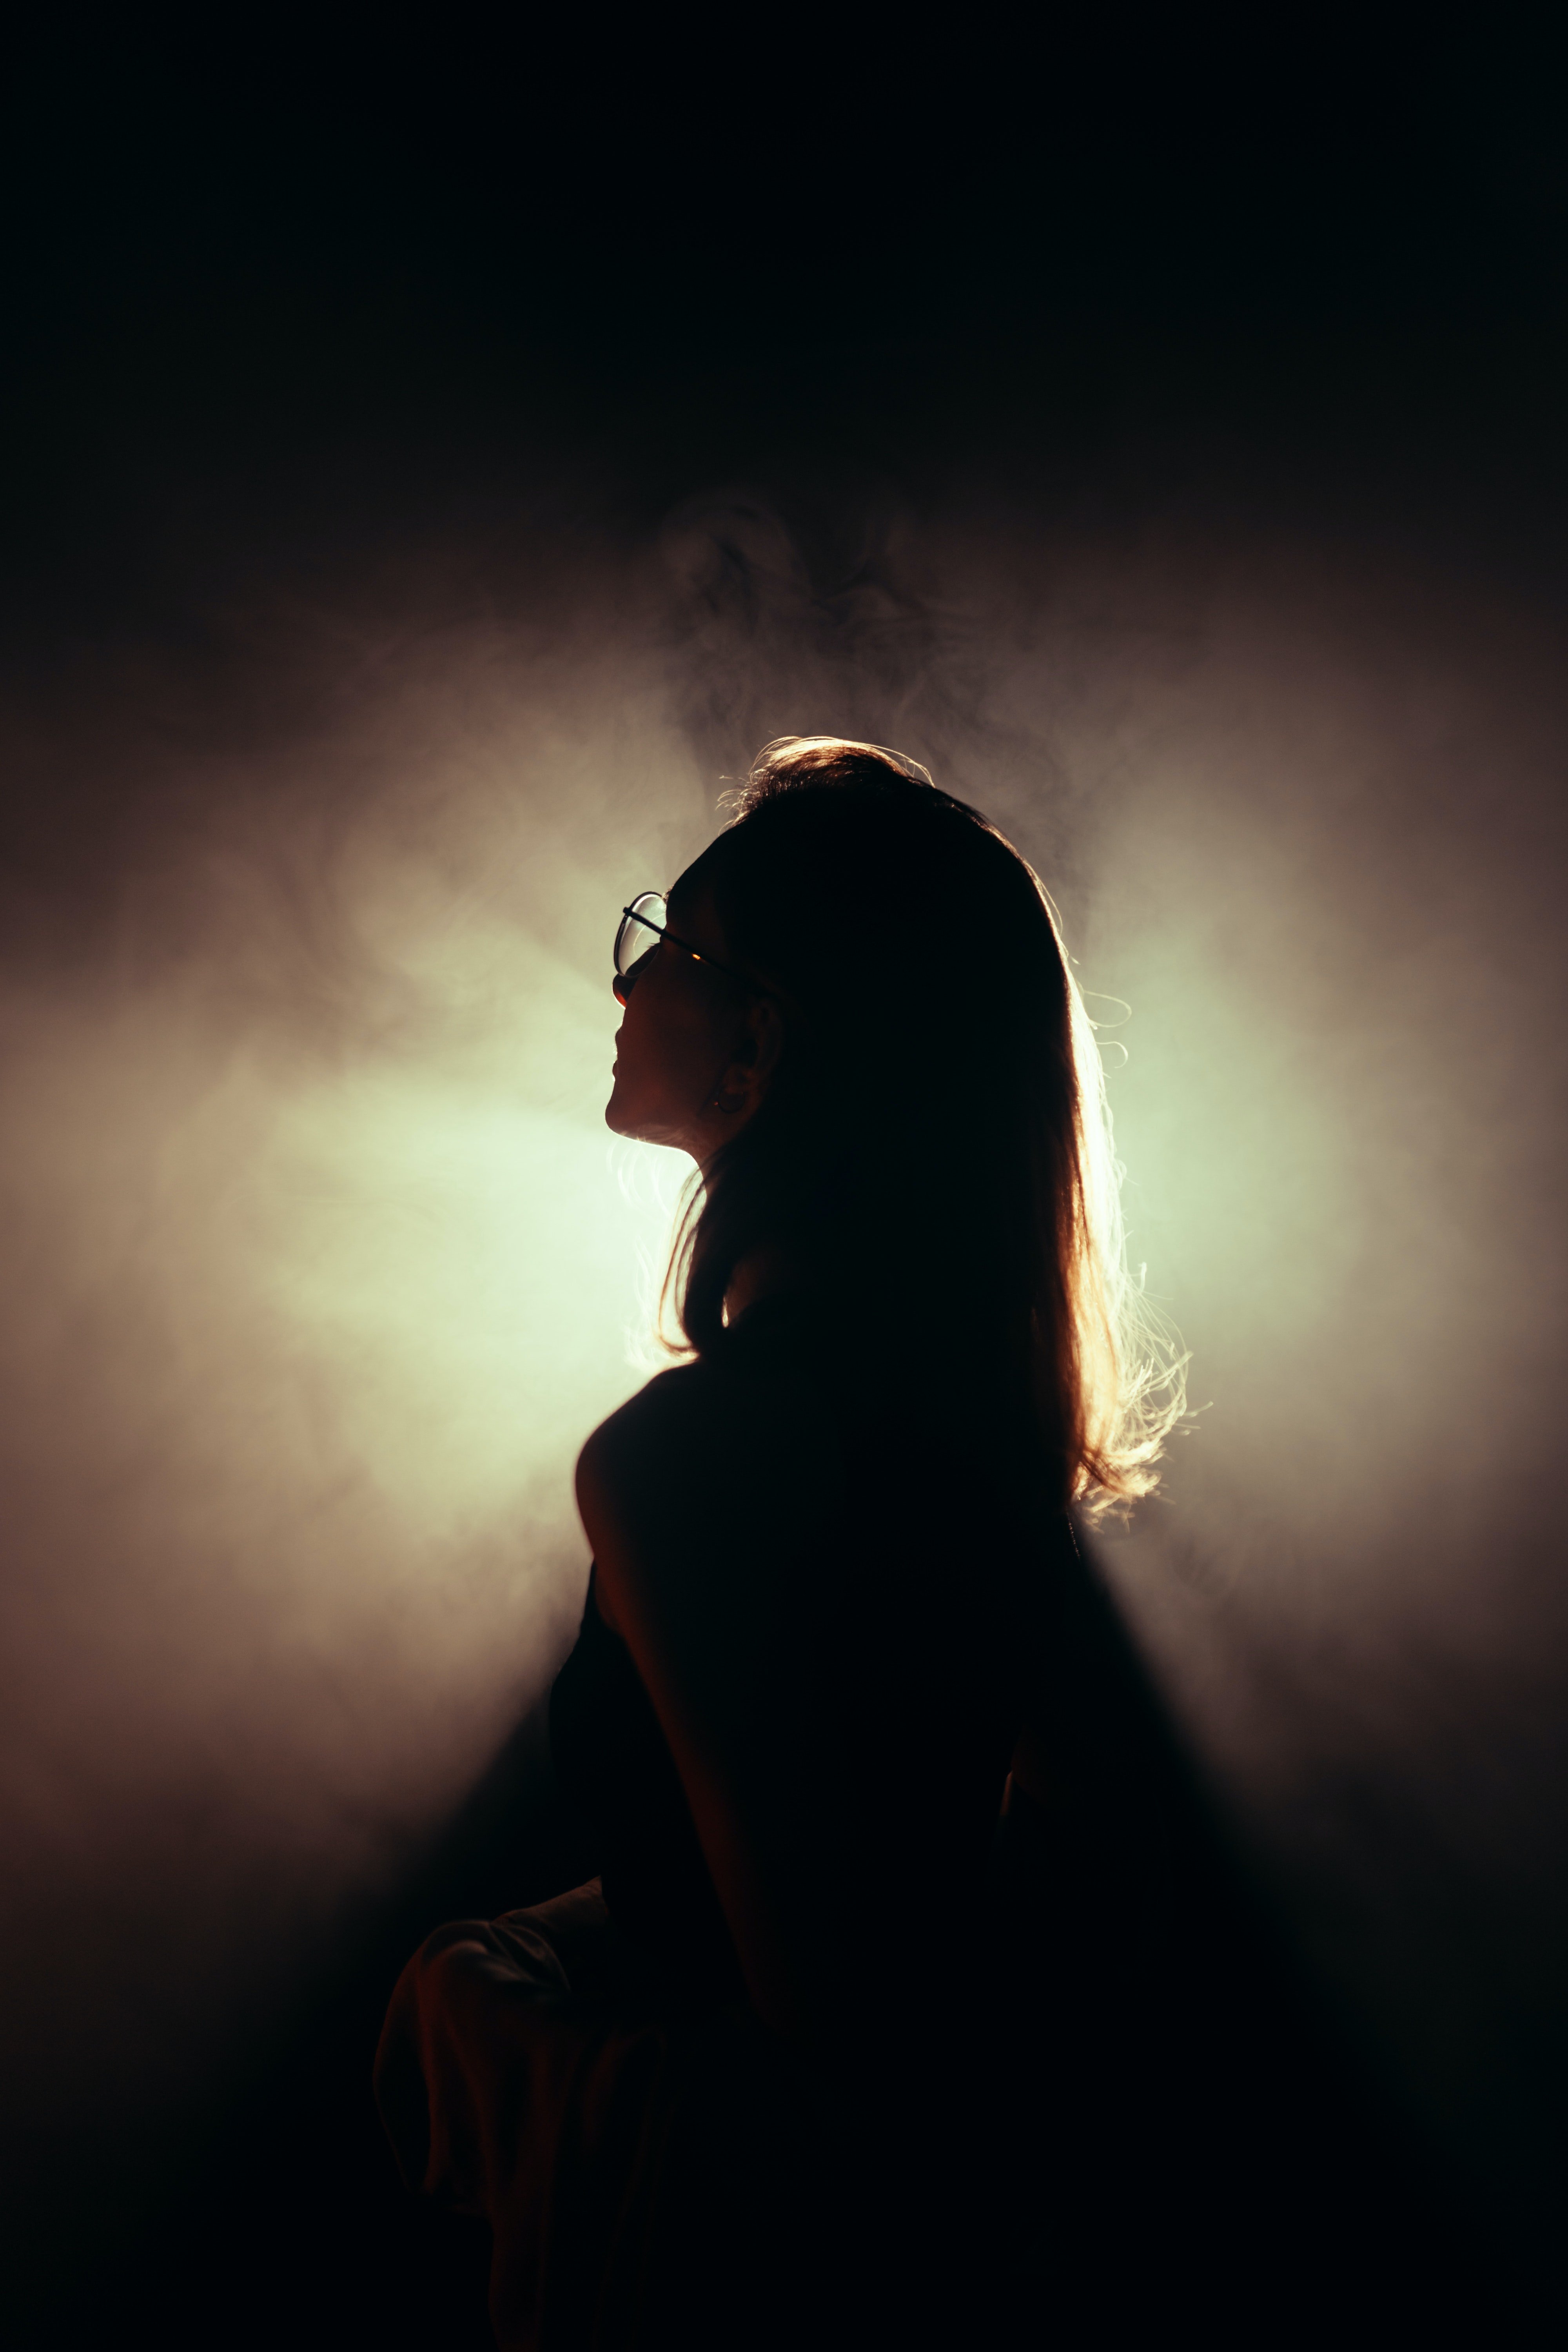 Silhouette of a woman. | Source: Pexels